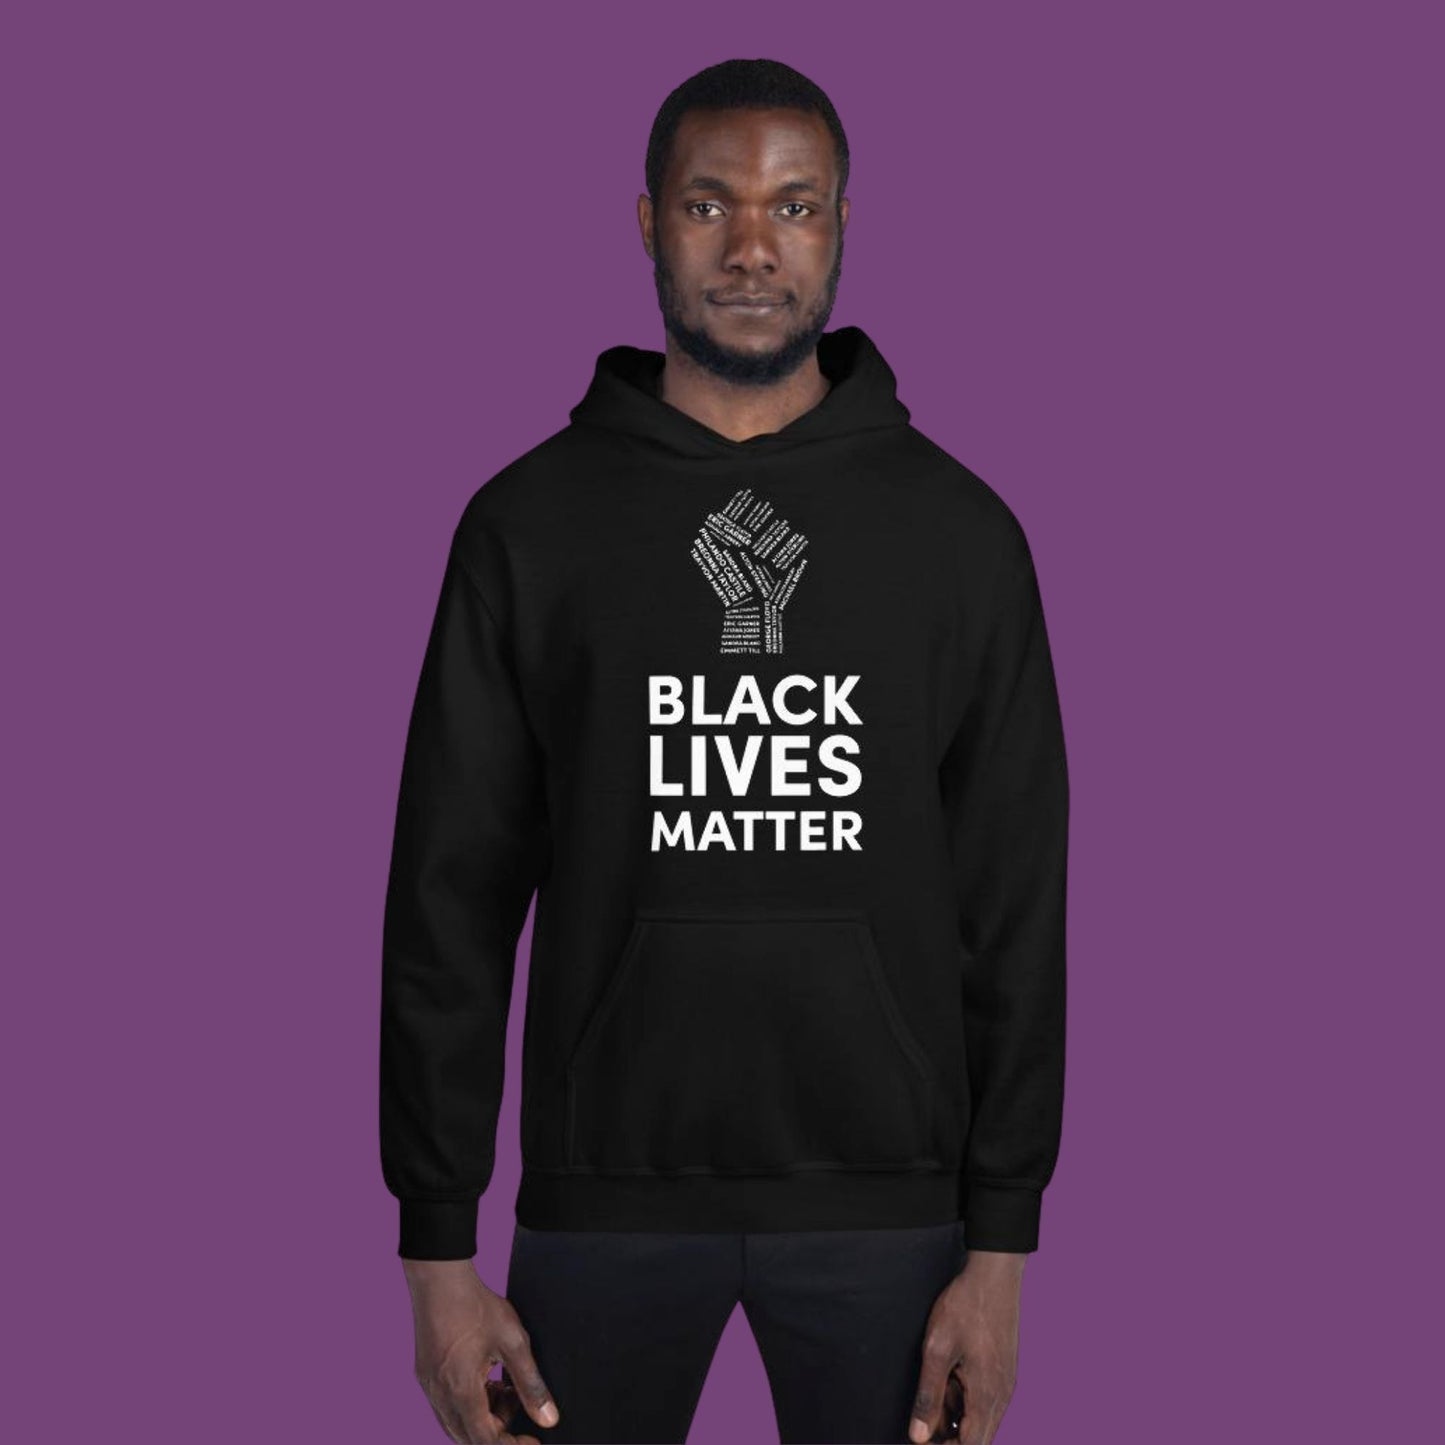 African American man wearing ablack hoodie with black lives matter in white with a white fist above